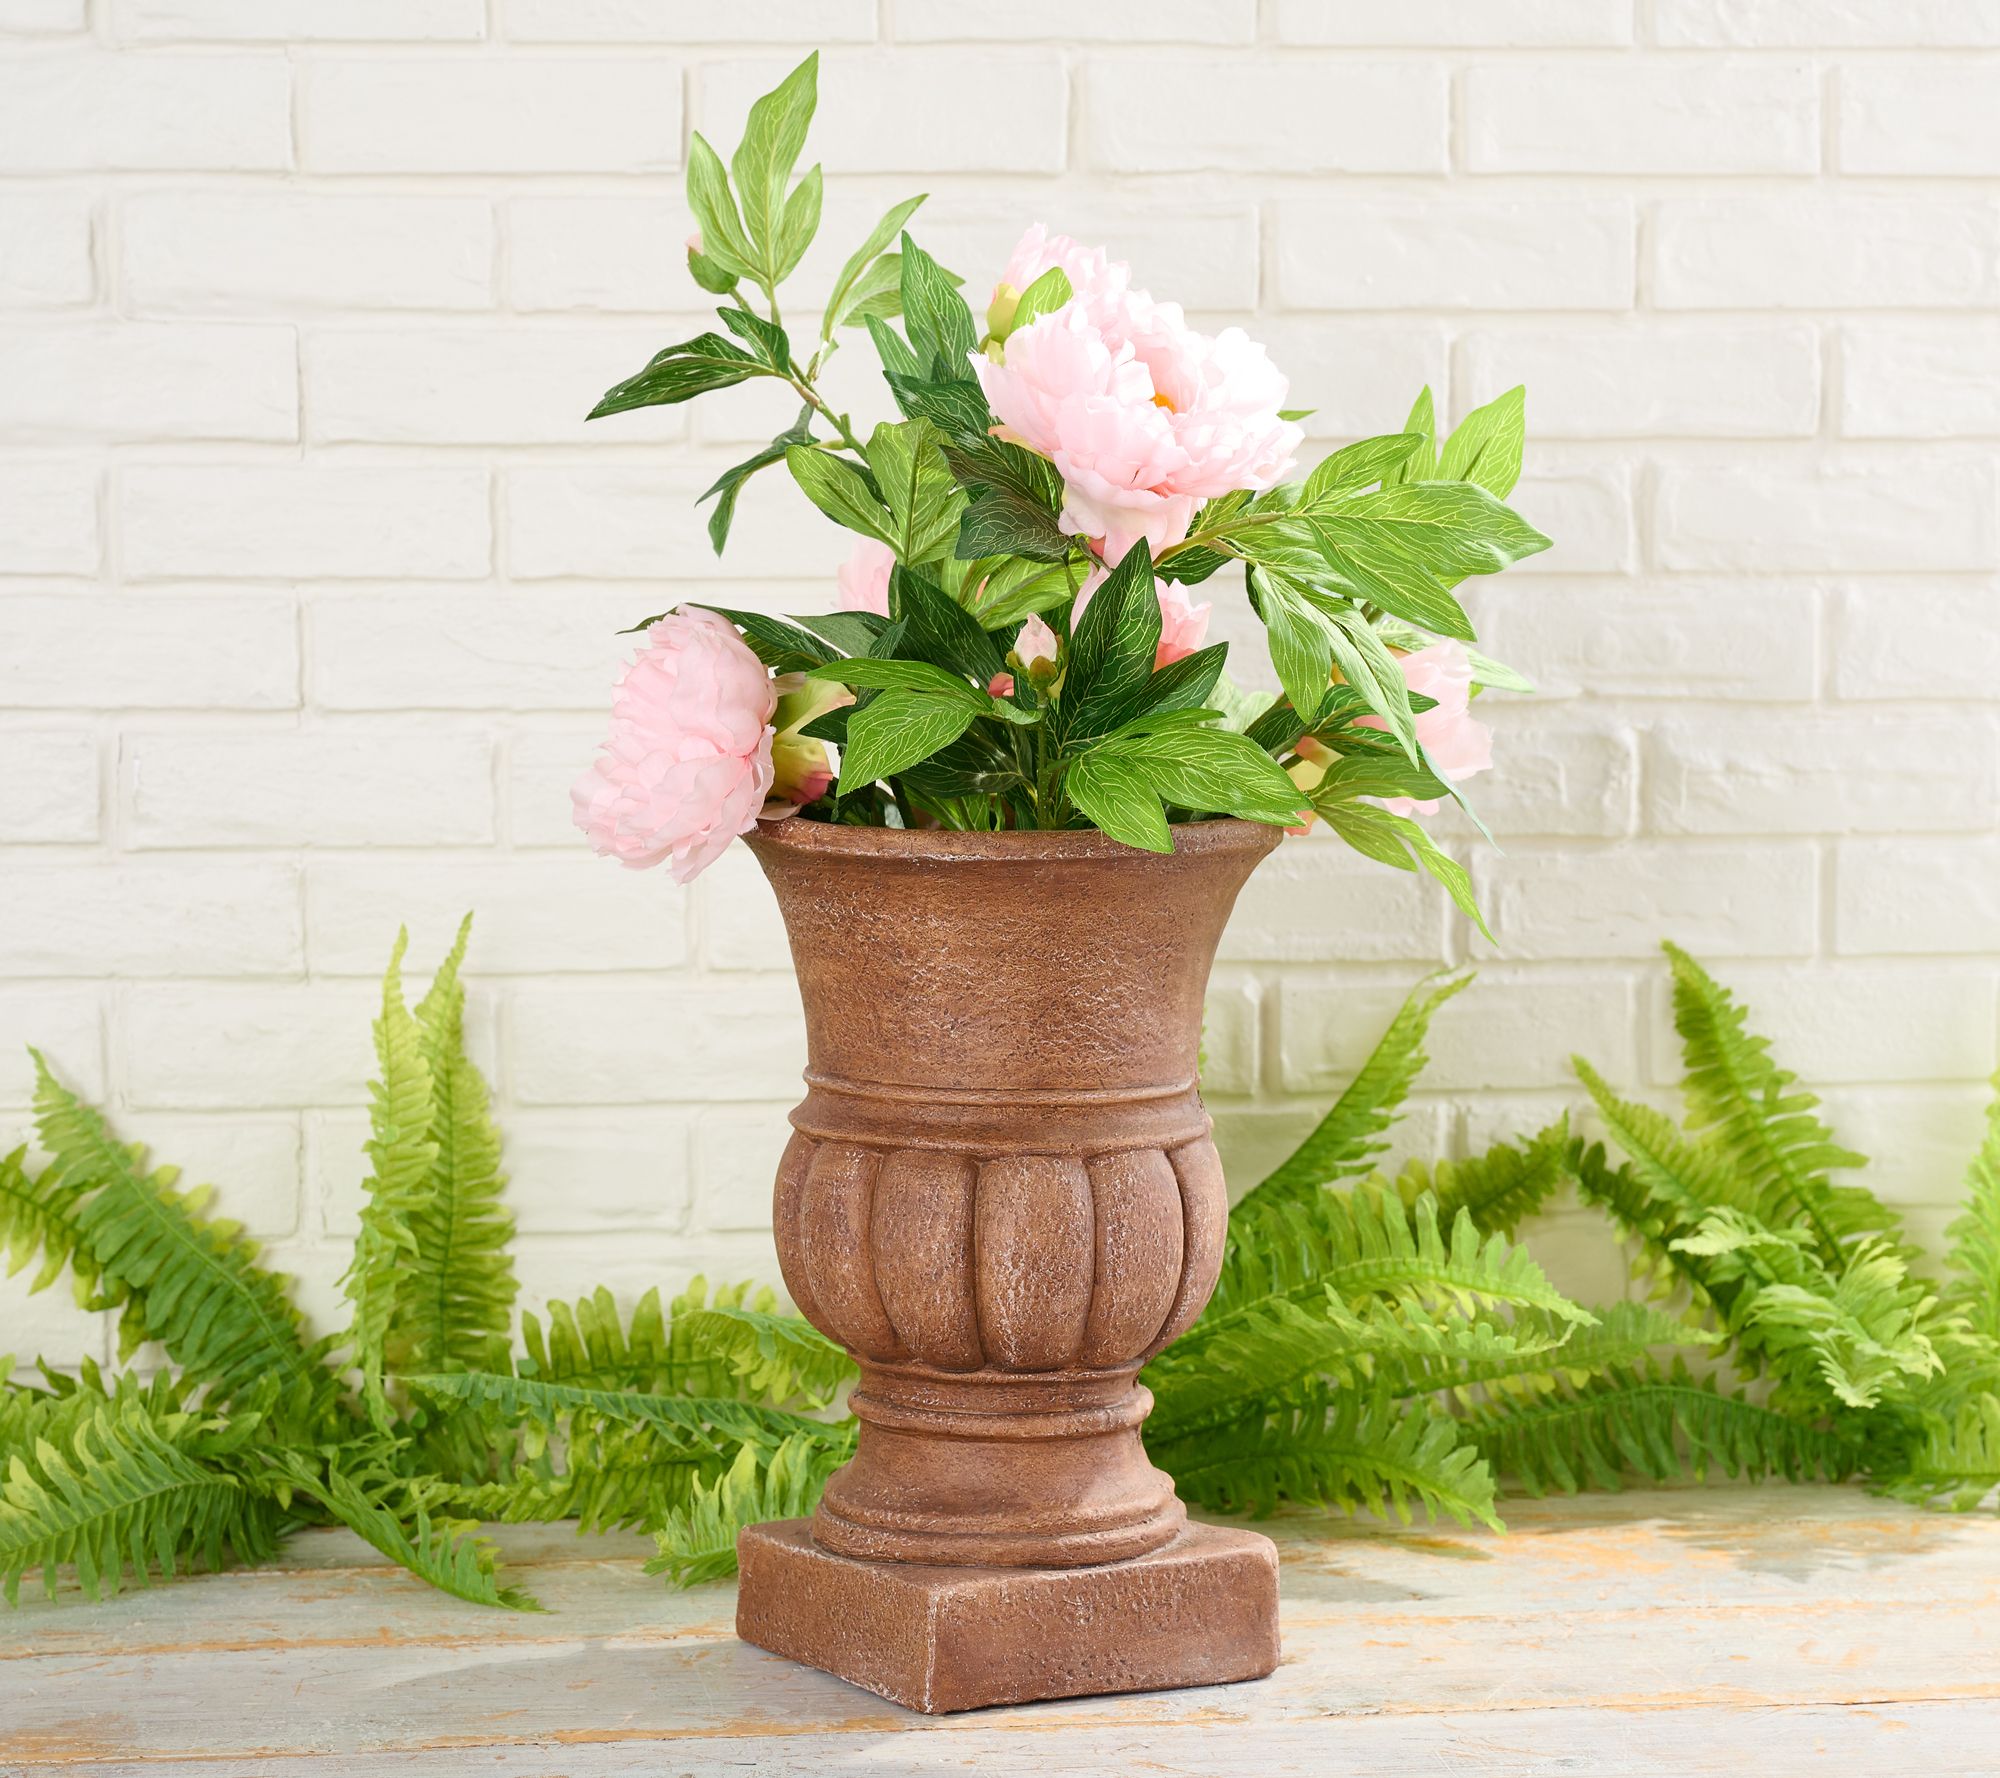 How to Make a Plastic Planter Pot Look Like Aged Stone - Savvy Apron